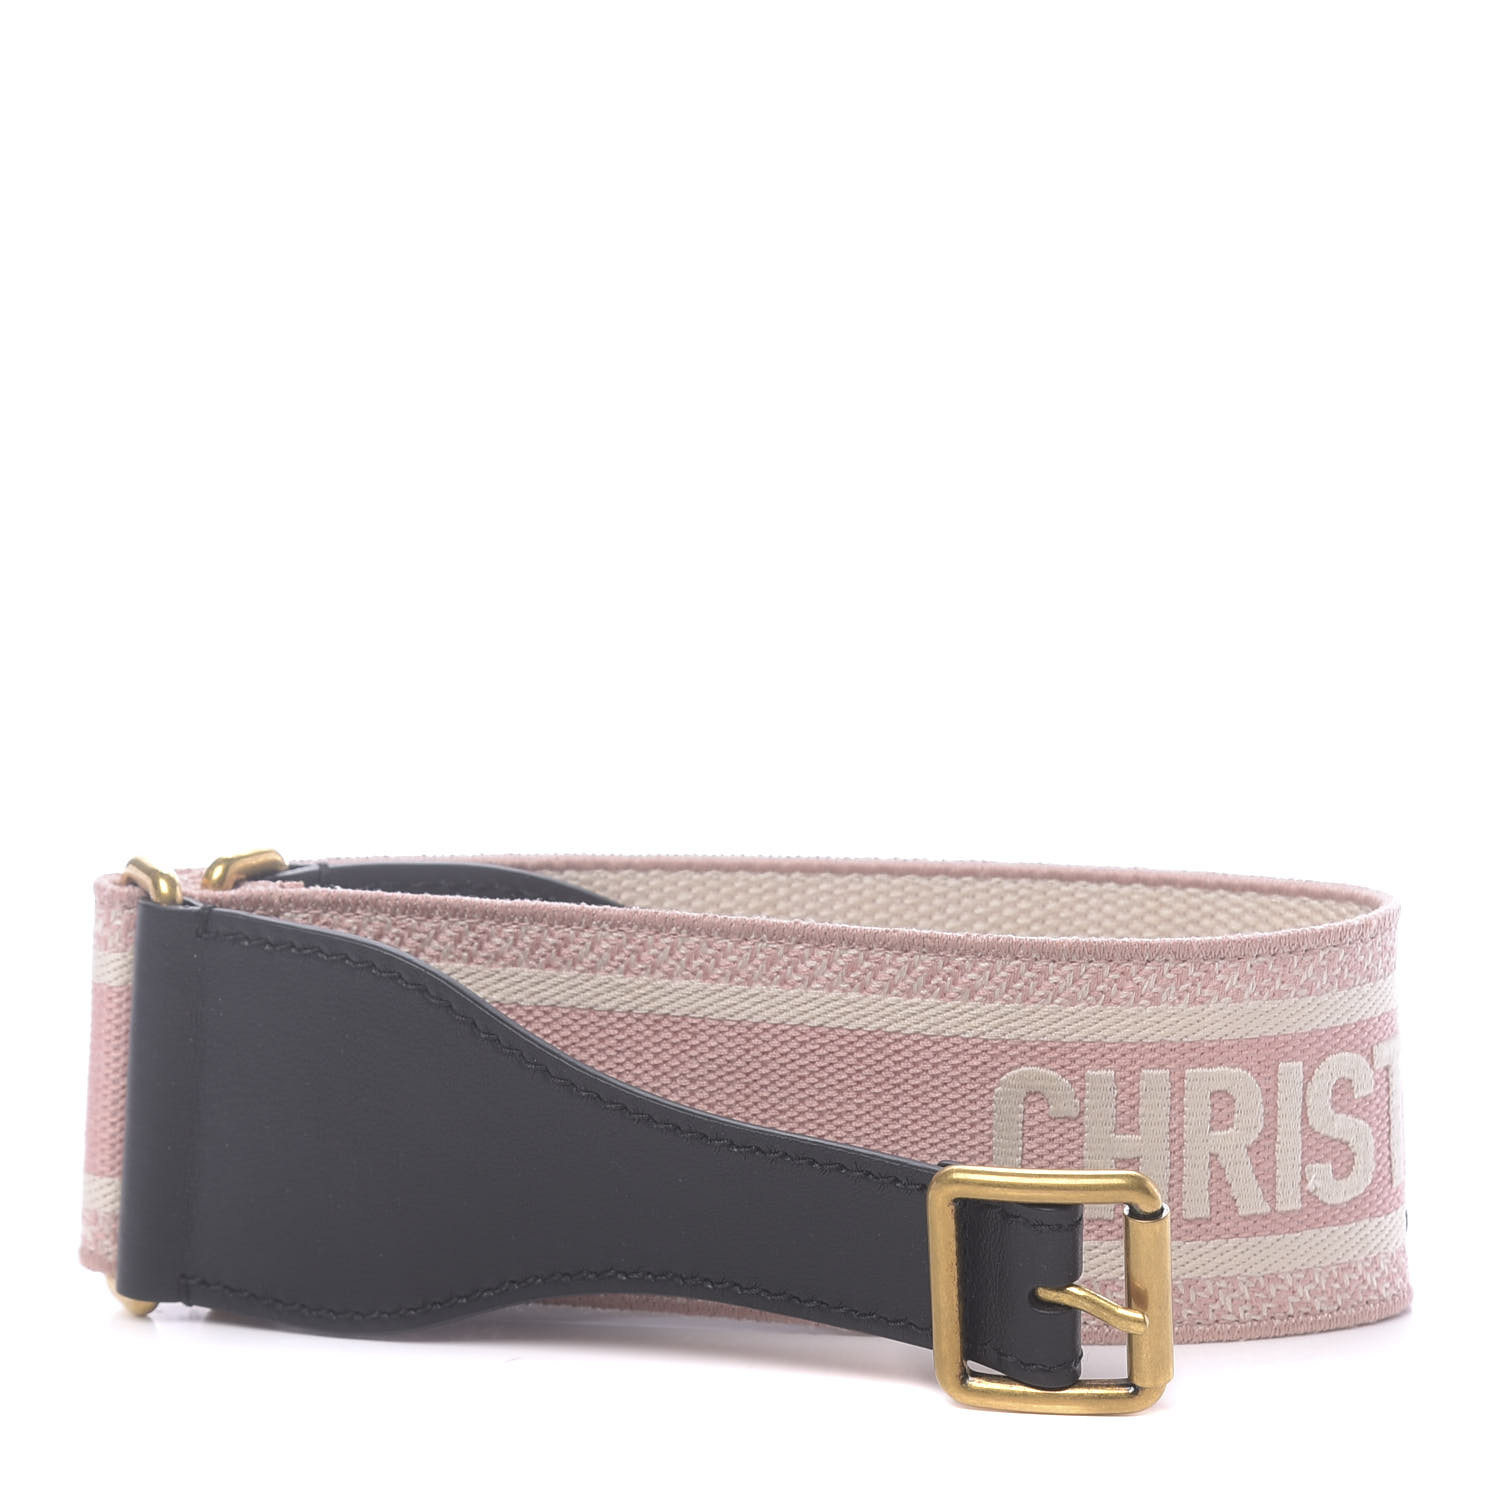 CHRISTIAN DIOR Canvas Embroidered 65mm Belt 75 Pink 650676 | FASHIONPHILE